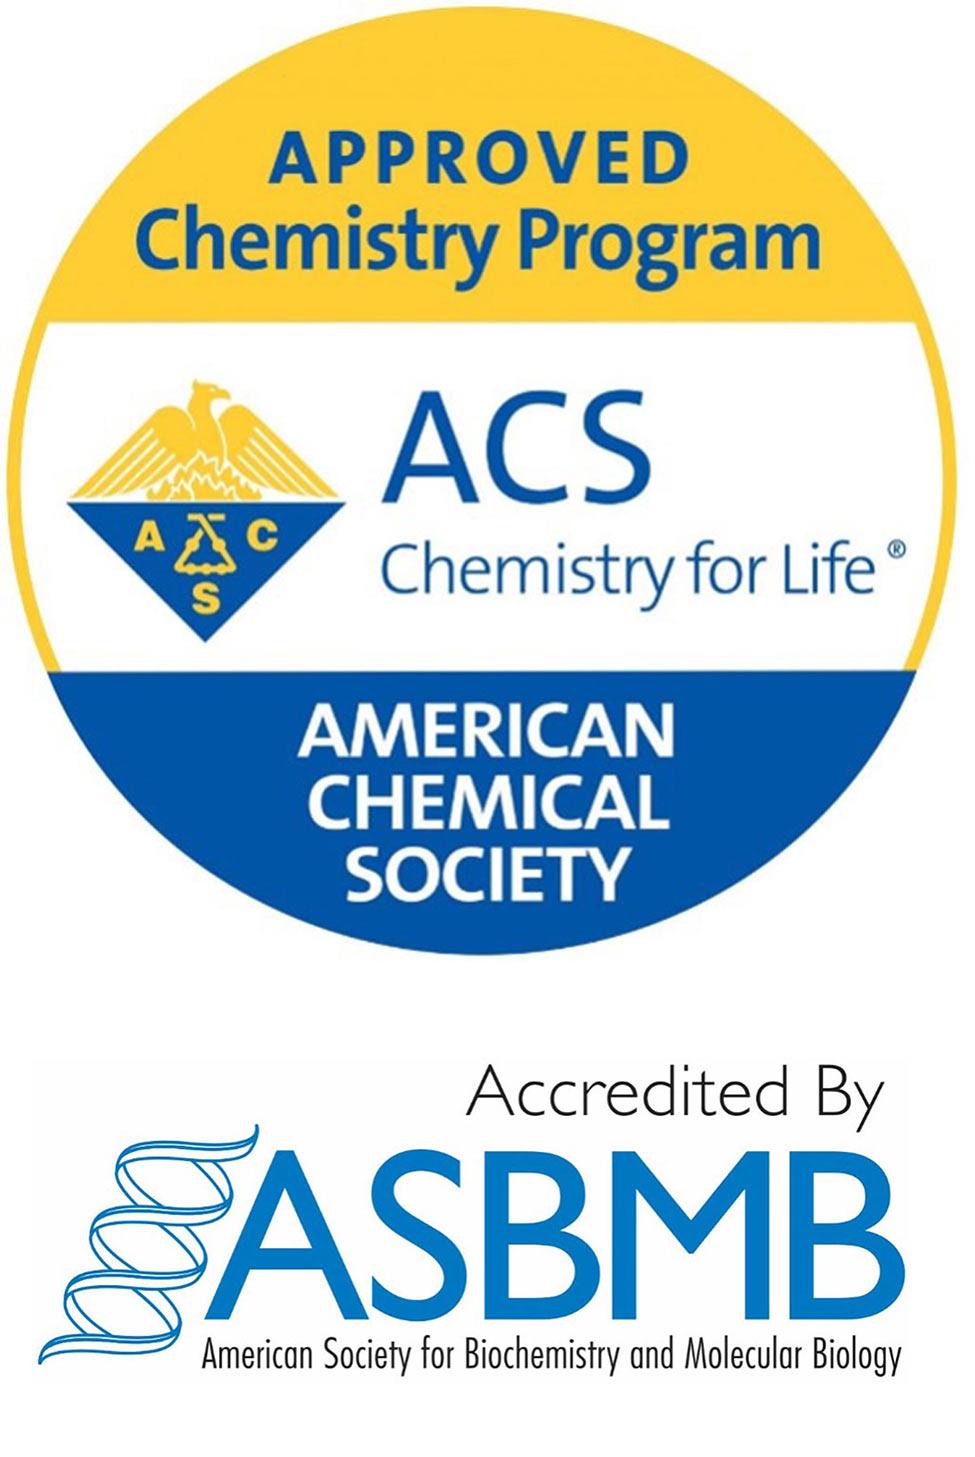 Logos for american society for biochemistry and molecular biology accreditation and american chemical society